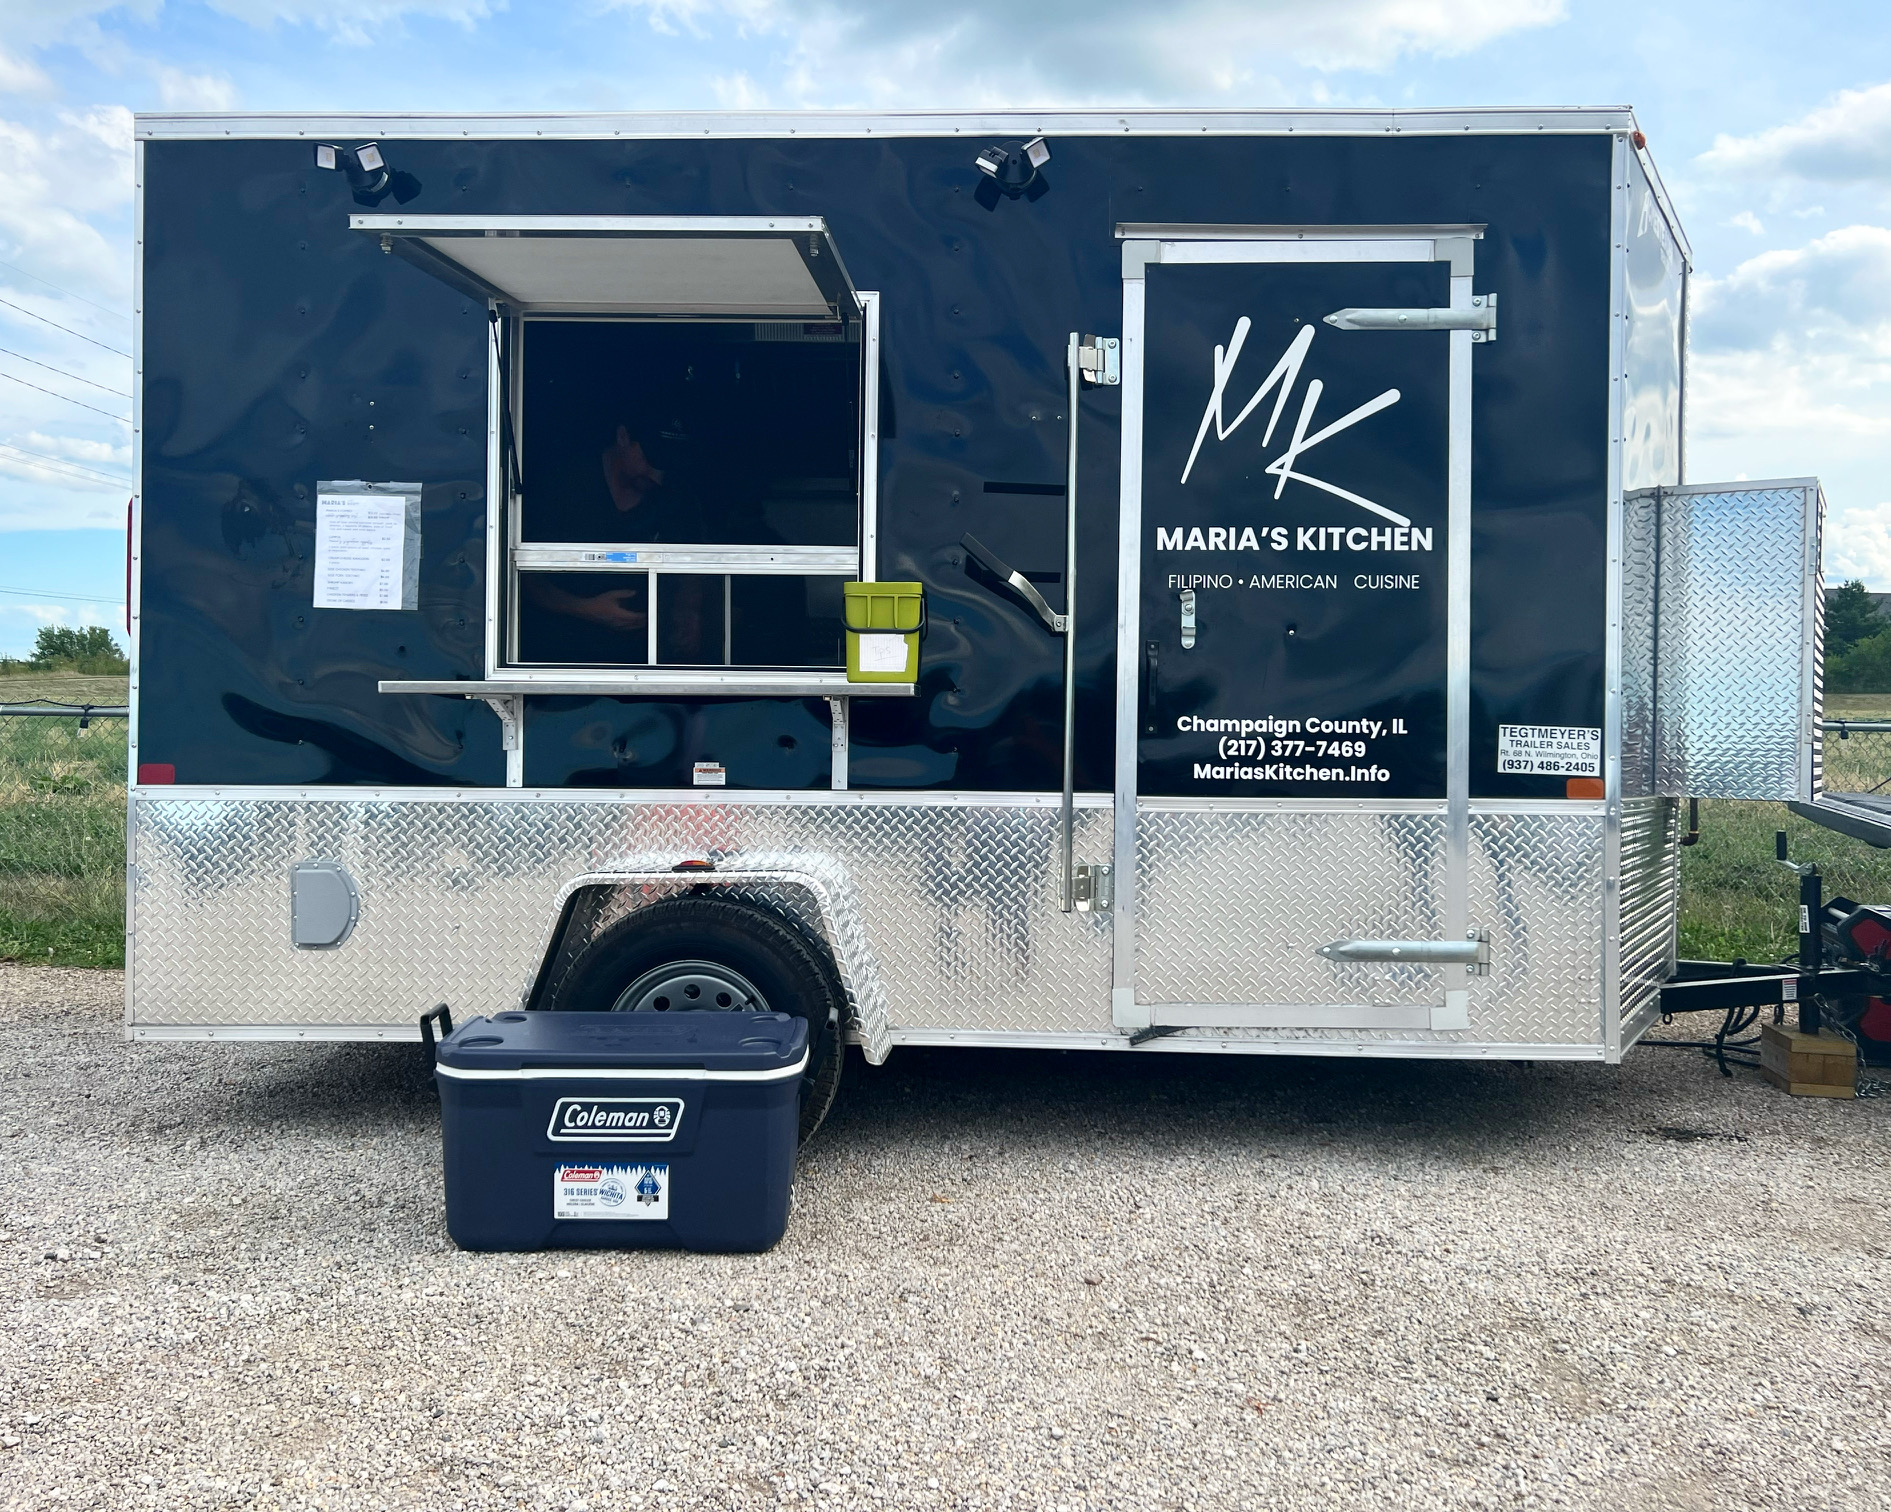 In the Riggs parking lot, there is a black food truck trailer for Maria's Kitchen with a black cooler in front. Photo by Alyssa Buckley.